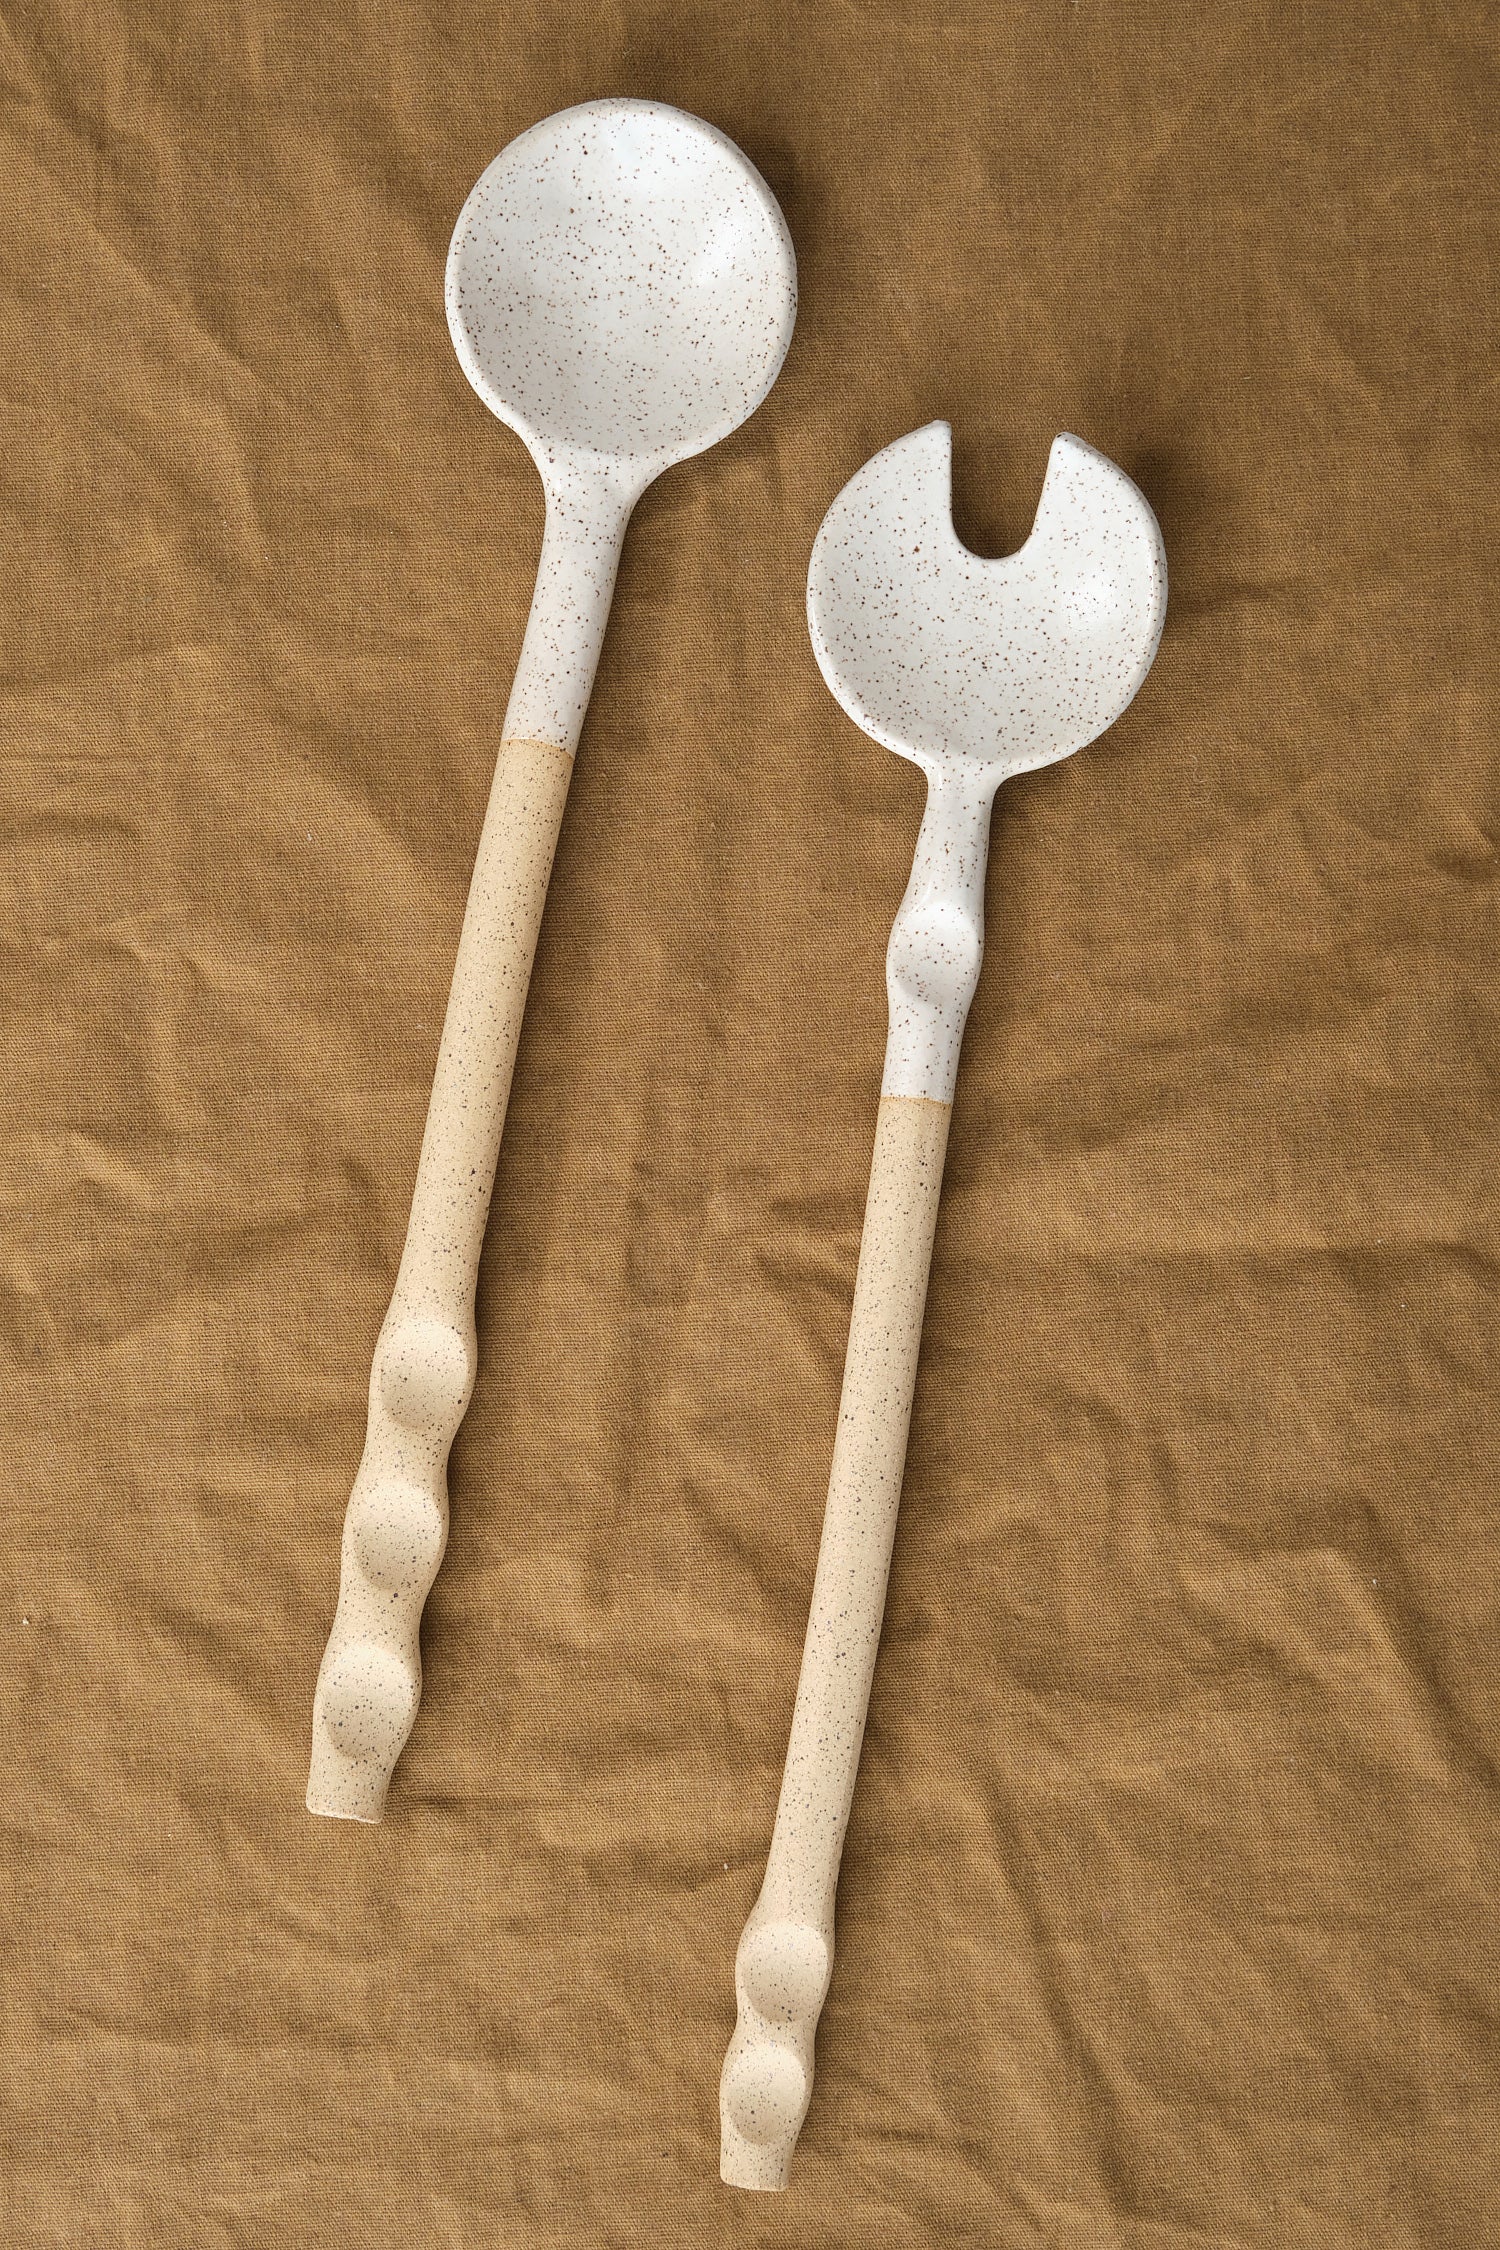 Dash Serving Spoon Set of 2 on table